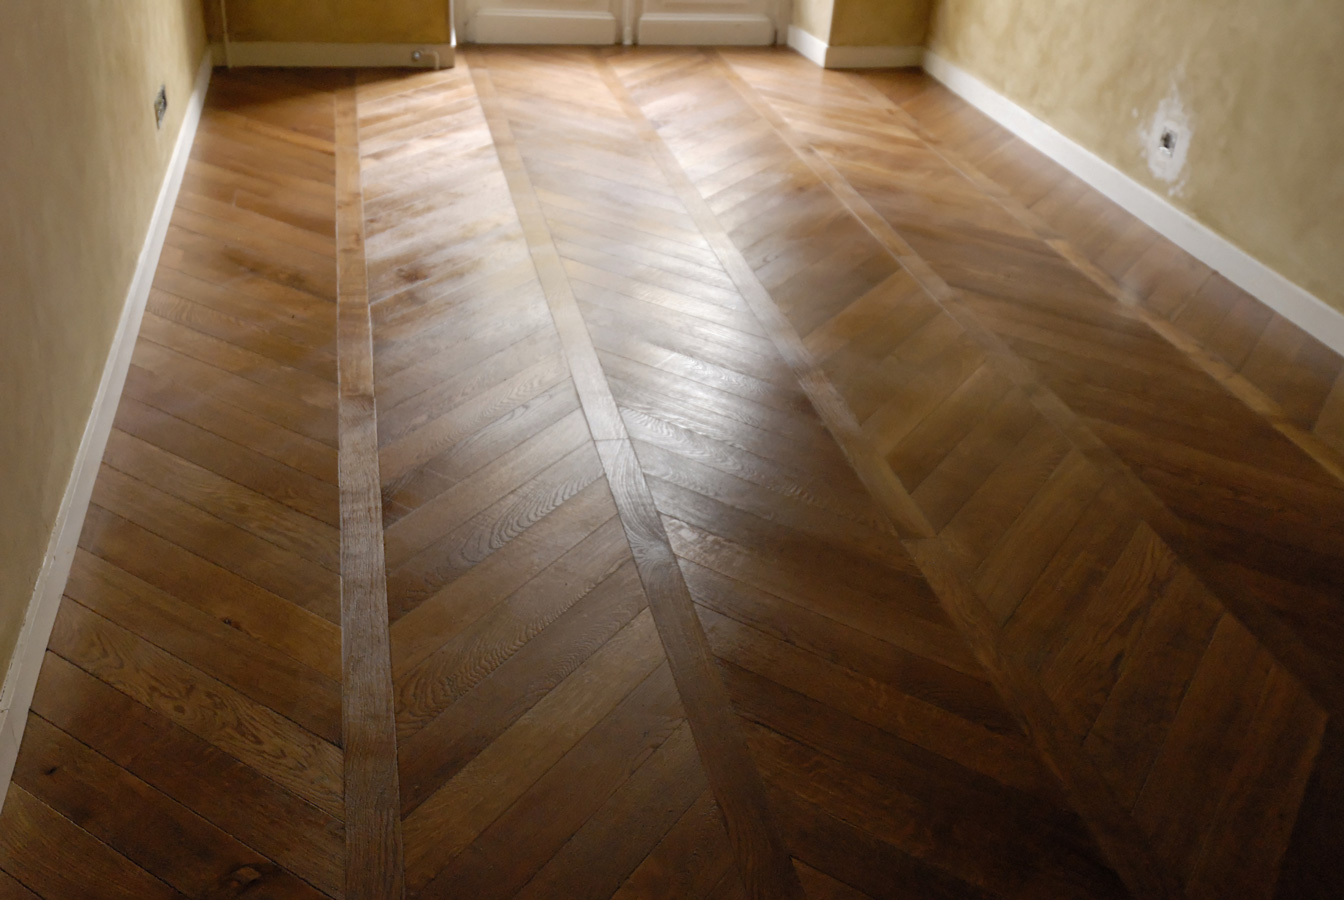 Finishing oiled waxed  for this traditional parquet